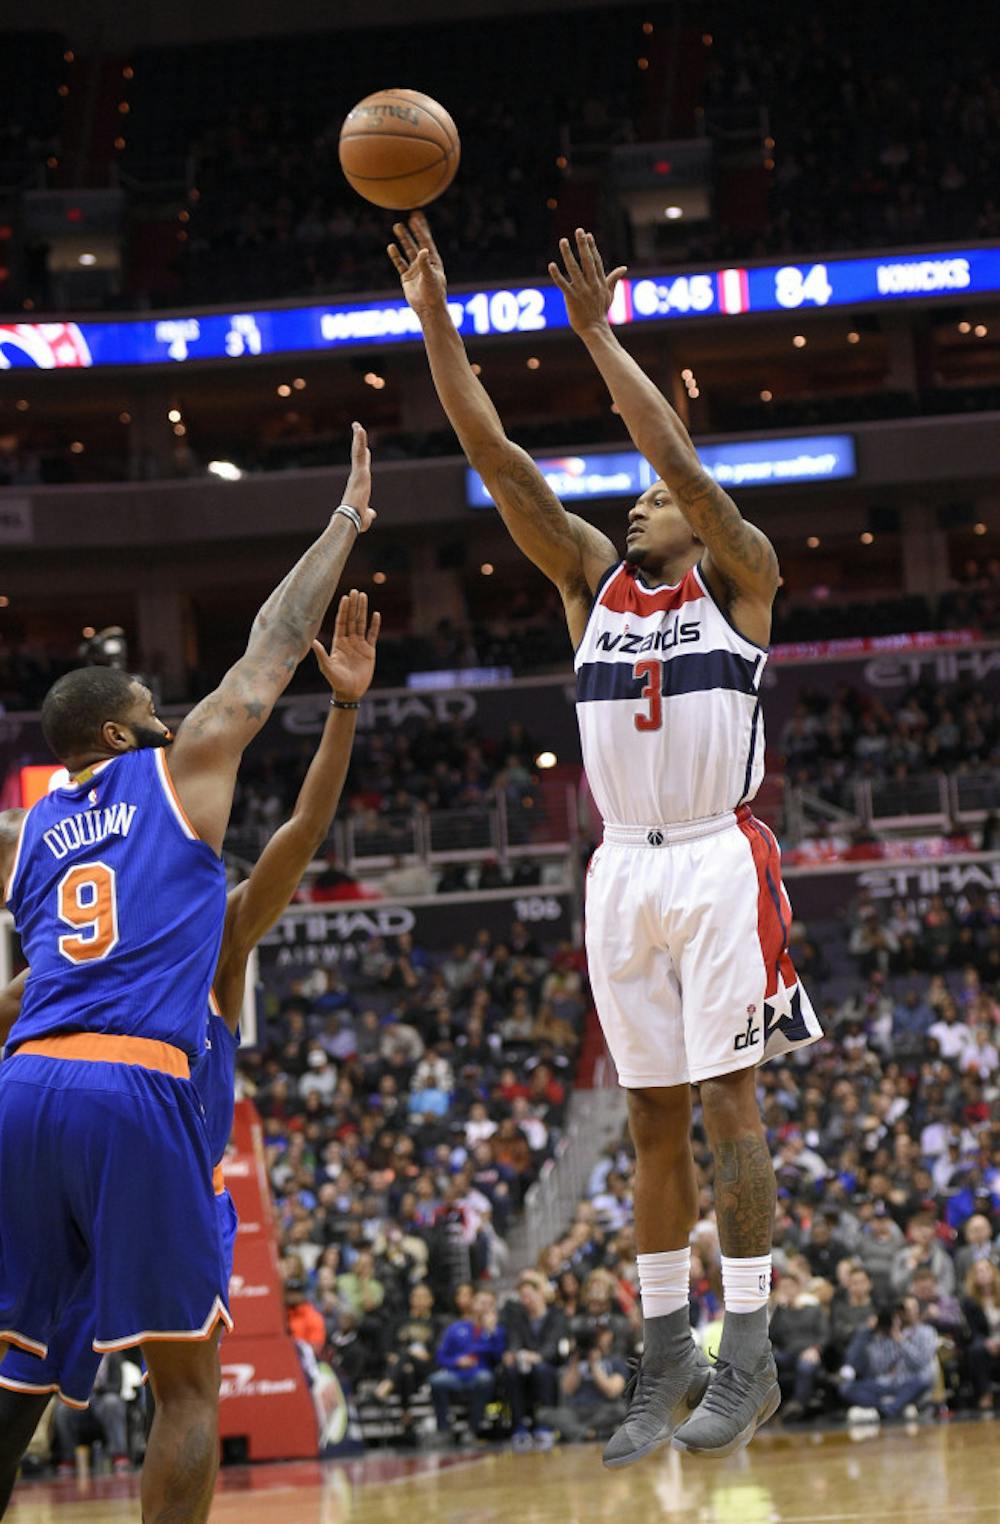 <p>Washington Wizards guard Bradley Beal (3) shoots against New York Knicks center Kyle O'Quinn (9) during the second half of an NBA basketball game, Tuesday, Jan. 31, 2017, in Washington. The Wizards won 117-101. (AP Photo/Nick Wass)</p>